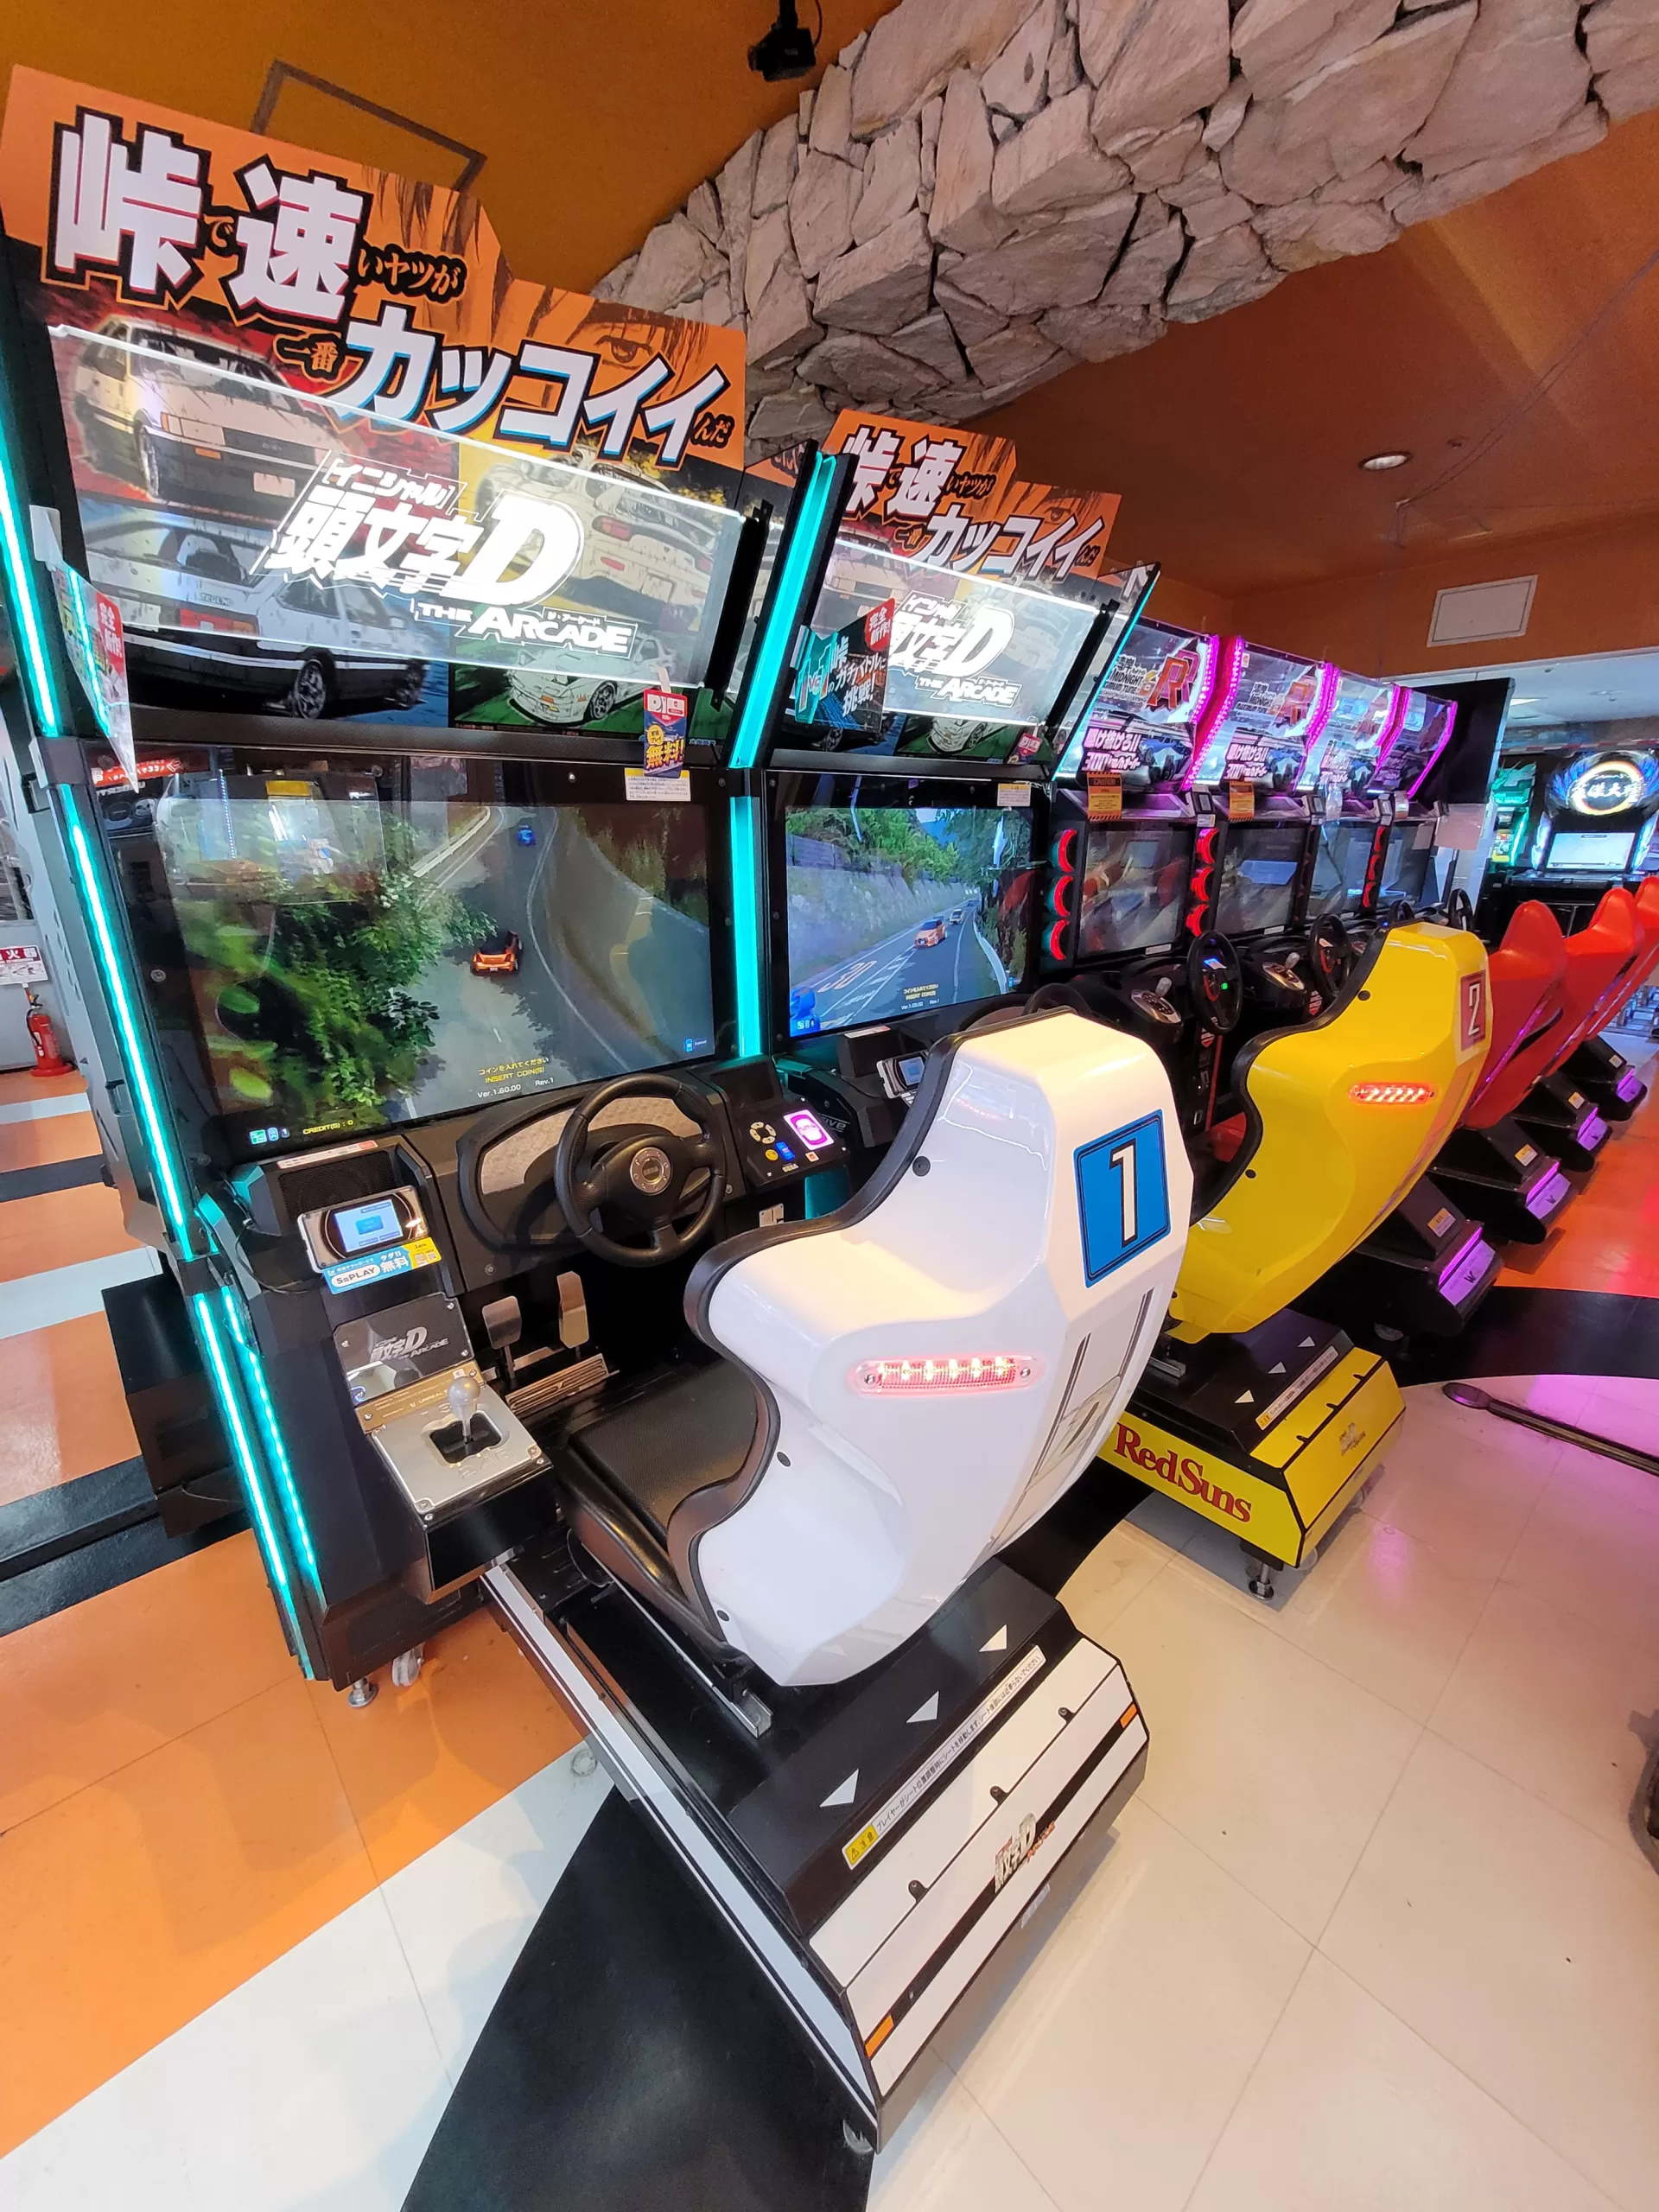 5 cool things you’ll find in Japan’s arcades